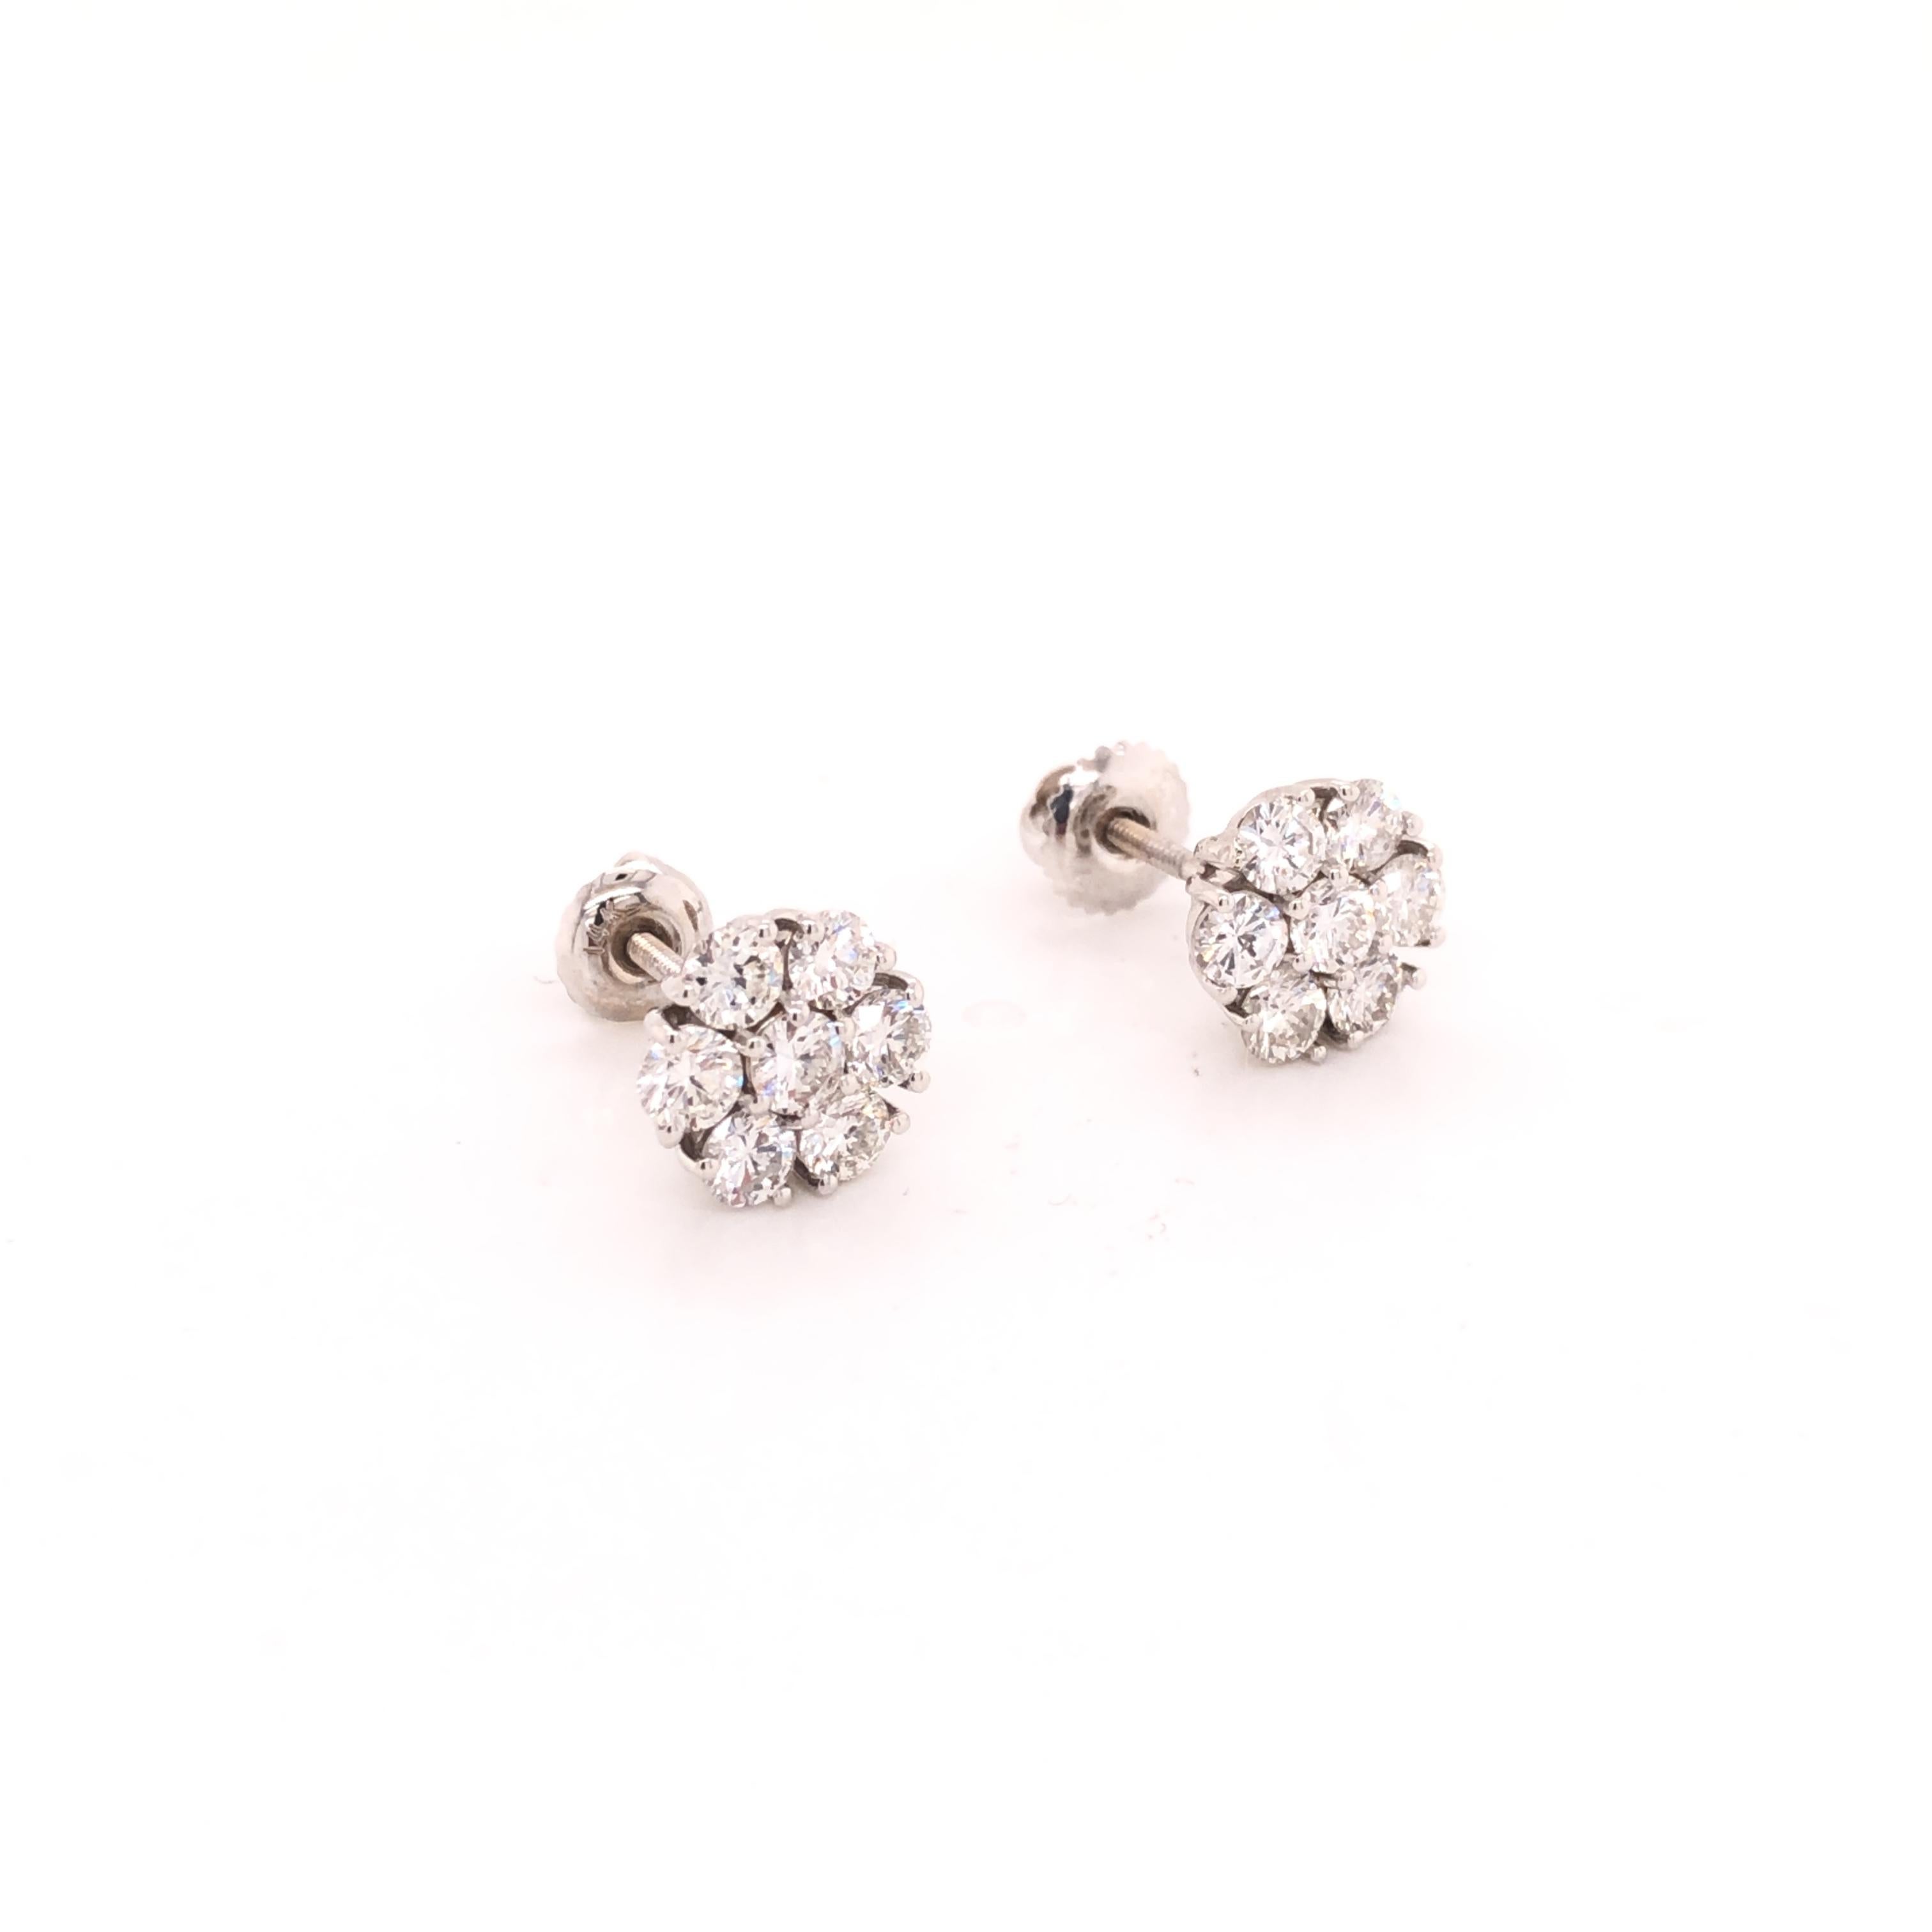 A simple and elegant pair of cluster diamond floral earring studs contain 14 round-cut 10 pointer diamonds, set in 14K white gold.

Diamond weight ~ 1.40 carats